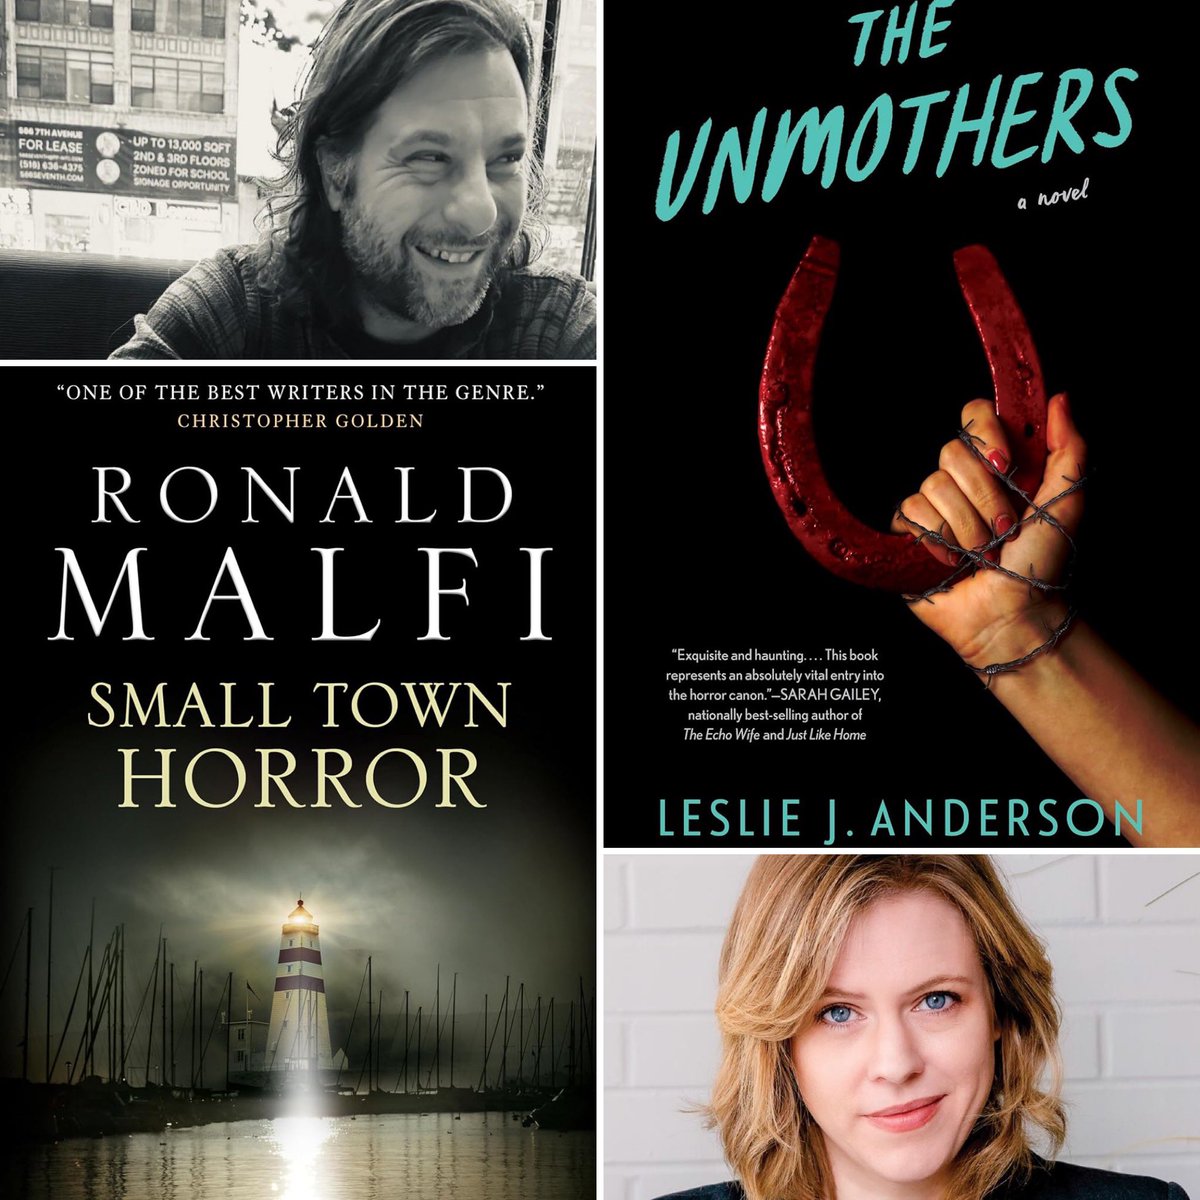 In two weeks, Ronald Malfi (SMALL TOWN HORROR) and Leslie J. Anderson (THE UNMOTHERS) join me live for our May session of Fearmongers. Wednesday, May 22nd at 8 PM/EST. Join us via Zoom by registering here: bit.ly/4aTpes4 @RonaldMalfi @inkhat @WestportLibrary